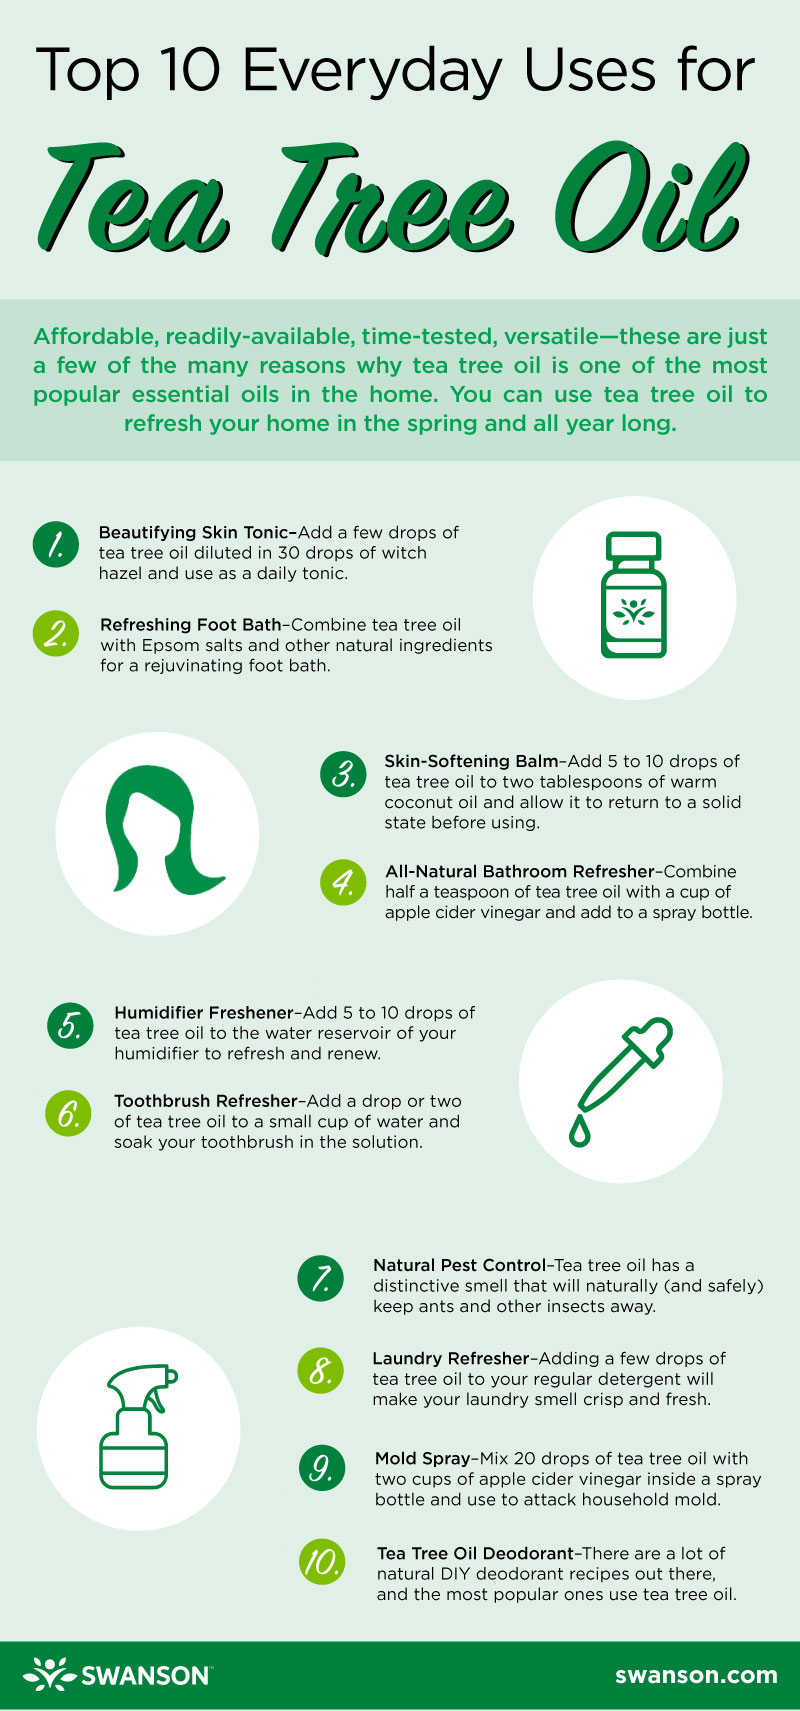 Top 10 Everyday Uses for Tea Tree Oil Infographic